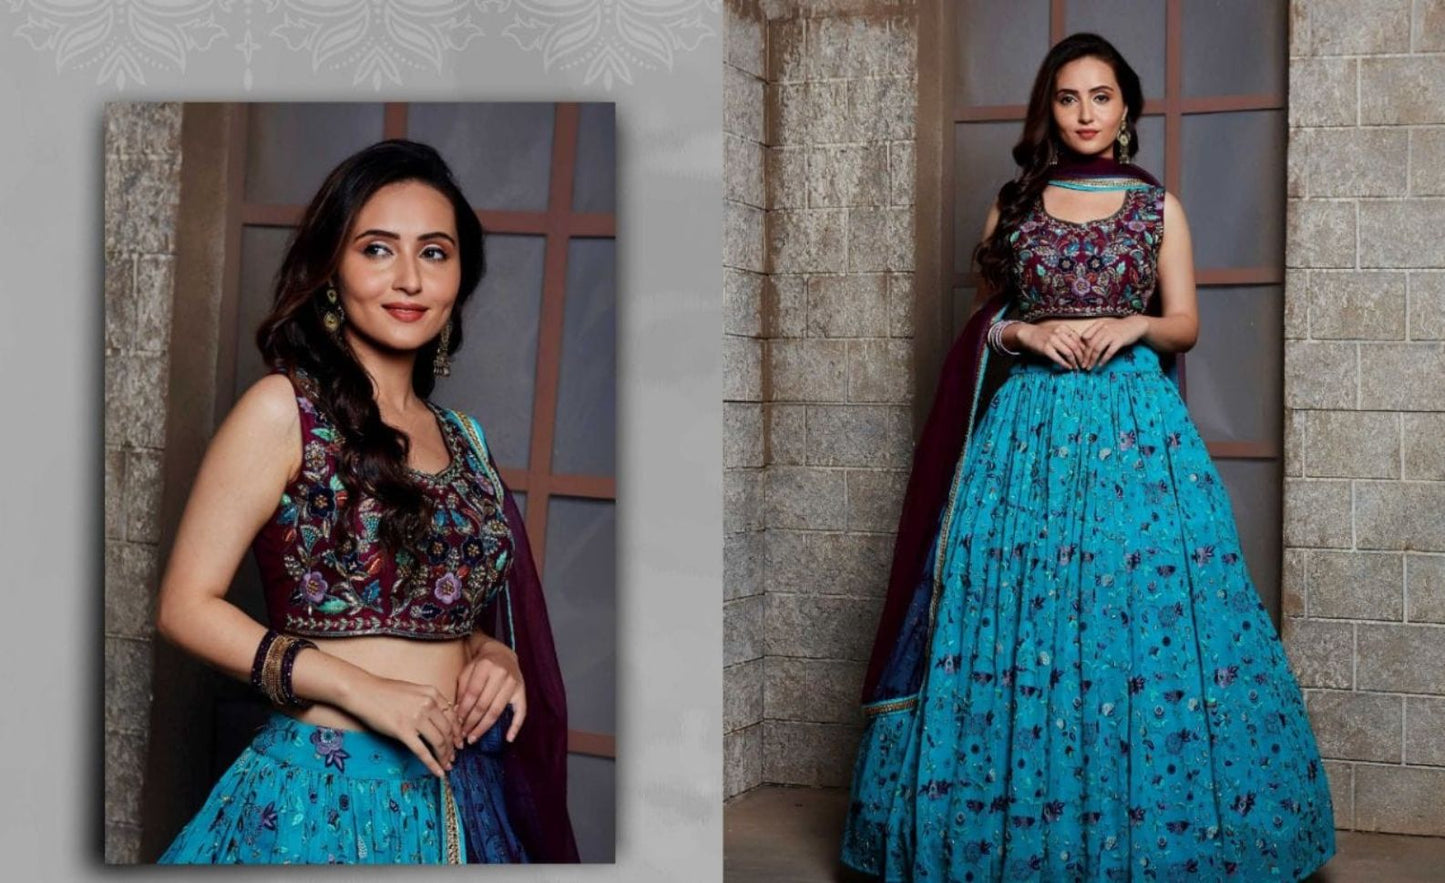 Blue and Maroon Color Embroidered Viscose Lehenga